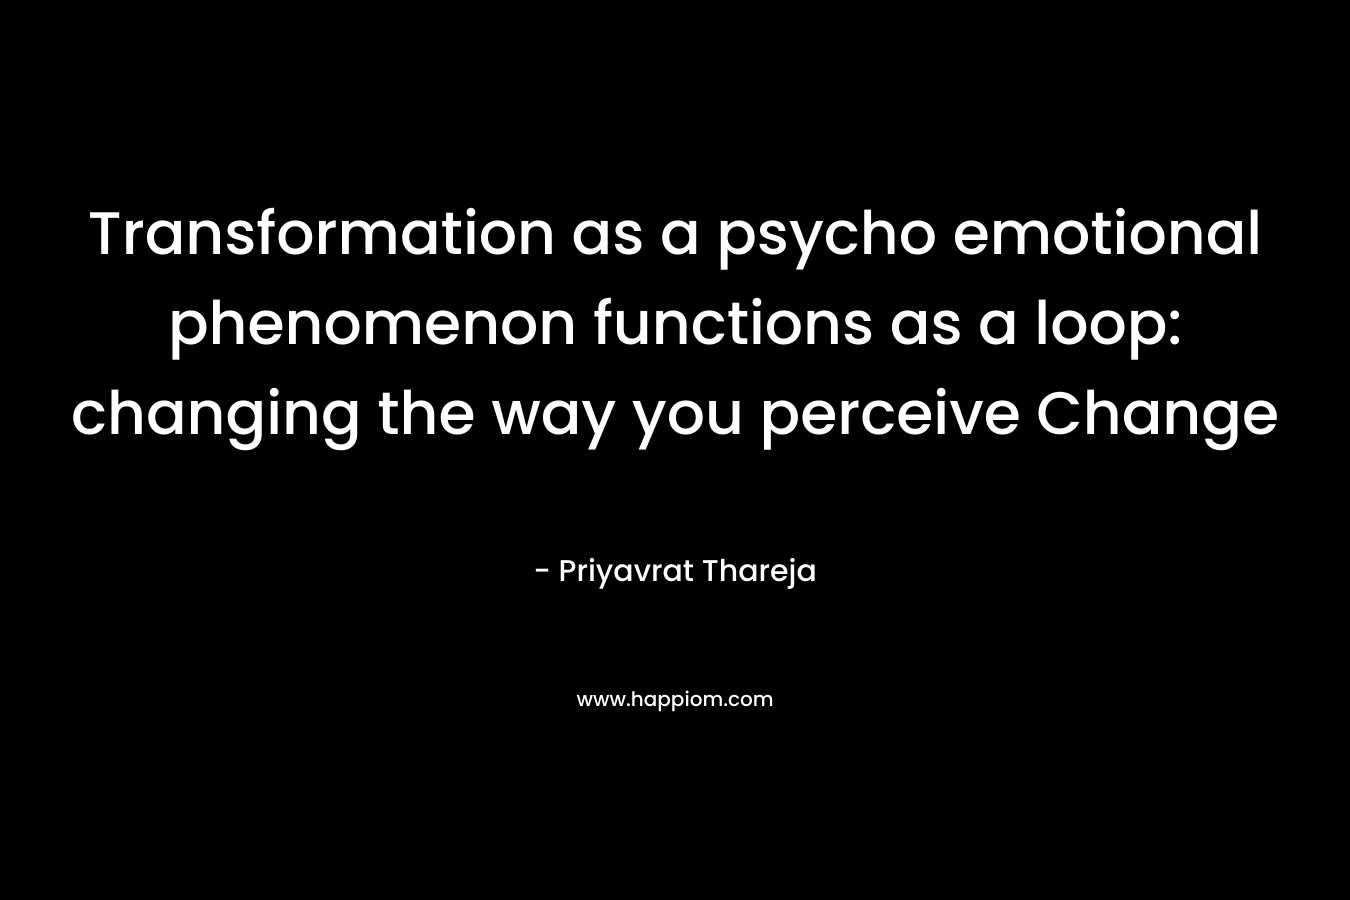 Transformation as a psycho emotional phenomenon functions as a loop: changing the way you perceive Change